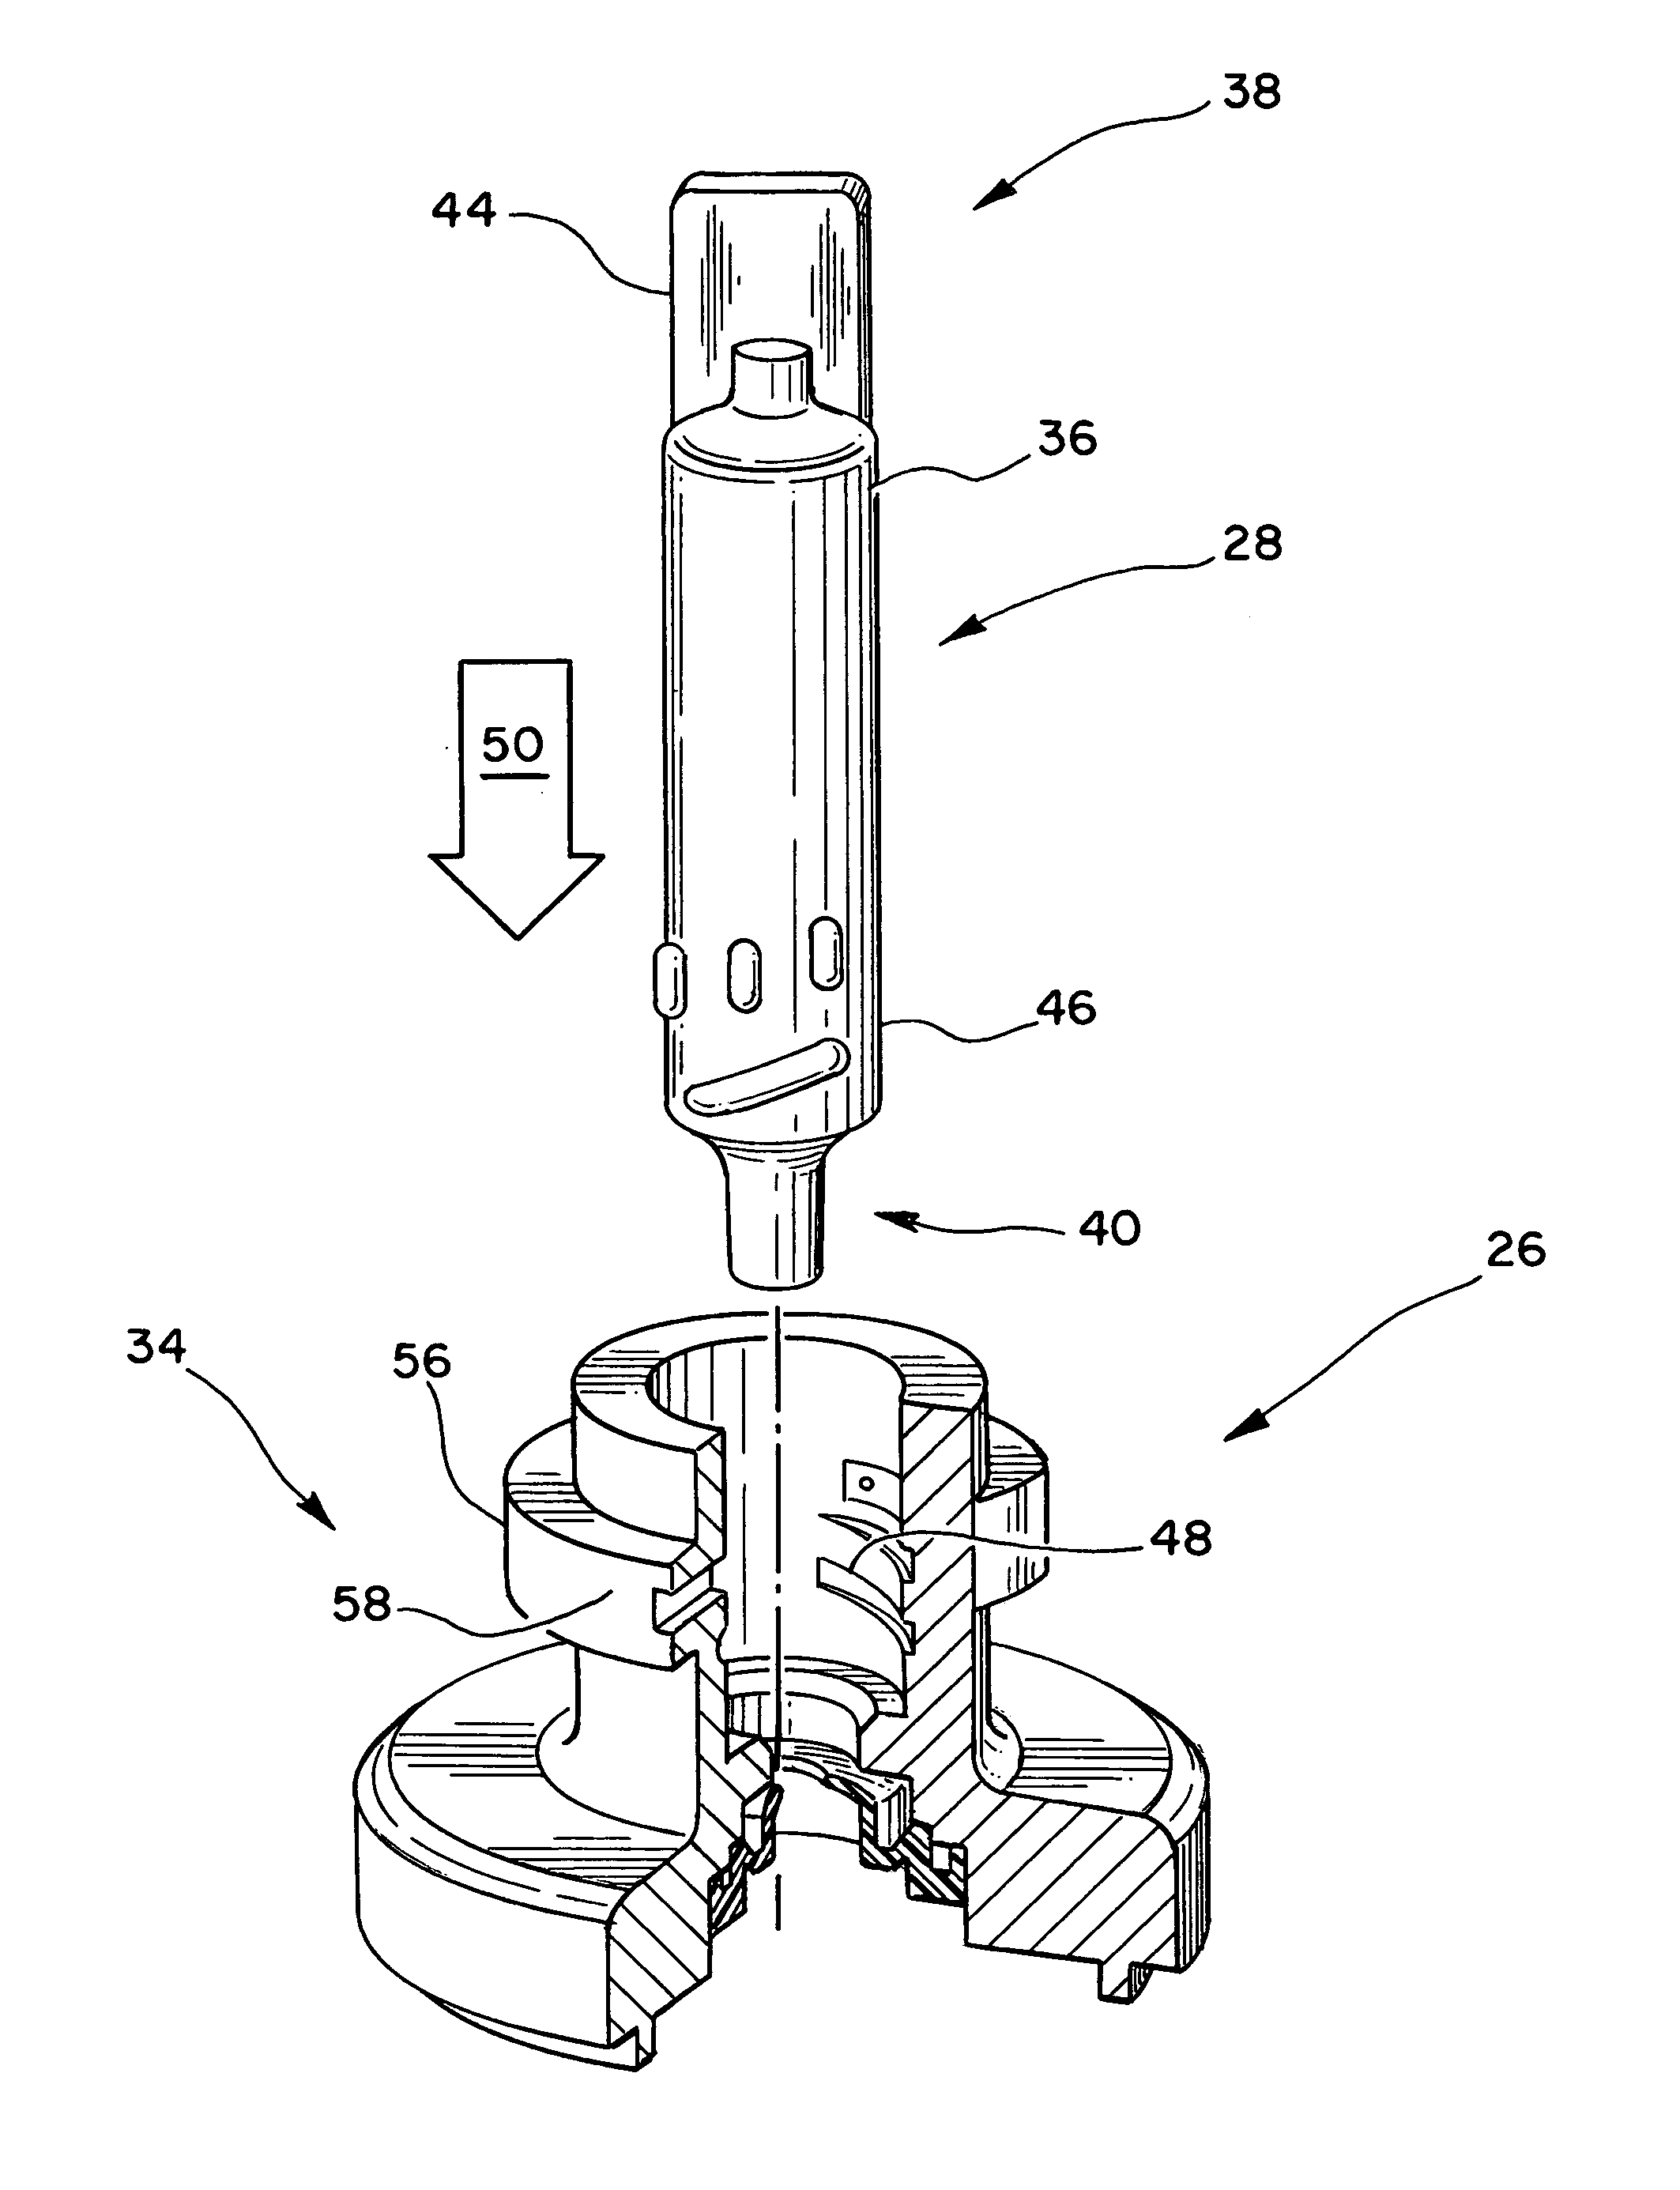 Methods and systems for operating an aerosol generator